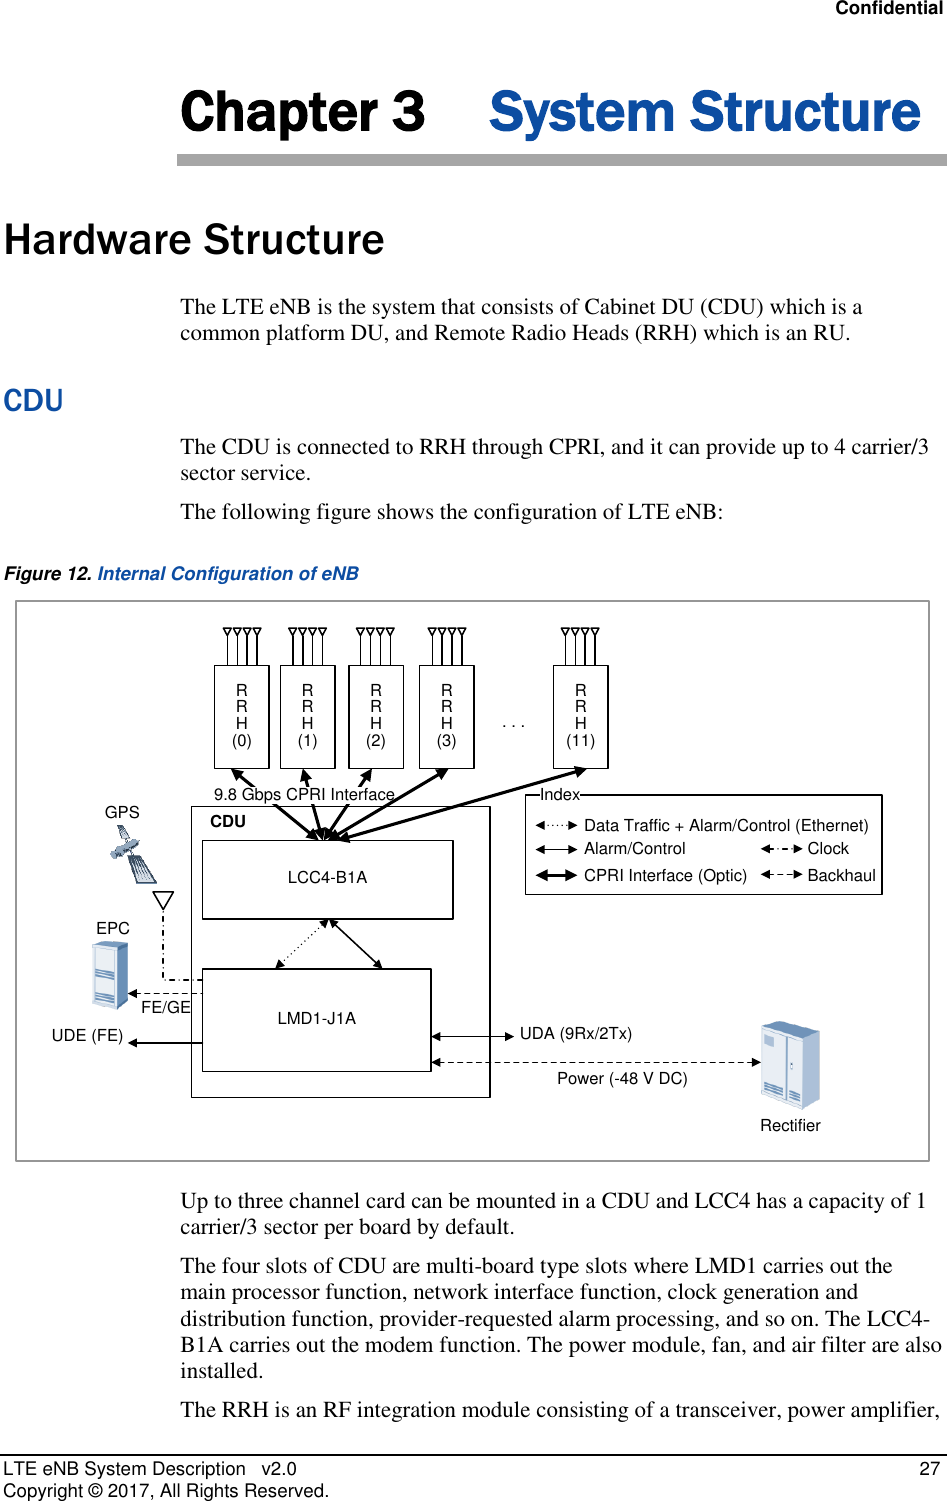 Confidential LTE eNB System Description   v2.0   27 Copyright ©  2017, All Rights Reserved. Chapter 3 System Structure Hardware Structure The LTE eNB is the system that consists of Cabinet DU (CDU) which is a common platform DU, and Remote Radio Heads (RRH) which is an RU. CDU The CDU is connected to RRH through CPRI, and it can provide up to 4 carrier/3 sector service. The following figure shows the configuration of LTE eNB: Figure 12. Internal Configuration of eNB IndexData Traffic + Alarm/Control (Ethernet)Alarm/ControlCPRI Interface (Optic)ClockBackhaulLCC4-B1ALMD1-J1ACDURRH(0)RRH(1)RRH(2)GPSEPCUDE (FE)9.8 Gbps CPRI InterfaceRectifierPower (-48 V DC)UDA (9Rx/2Tx)FE/GERRH(3)RRH(11). . . Up to three channel card can be mounted in a CDU and LCC4 has a capacity of 1 carrier/3 sector per board by default. The four slots of CDU are multi-board type slots where LMD1 carries out the main processor function, network interface function, clock generation and distribution function, provider-requested alarm processing, and so on. The LCC4-B1A carries out the modem function. The power module, fan, and air filter are also installed. The RRH is an RF integration module consisting of a transceiver, power amplifier, 